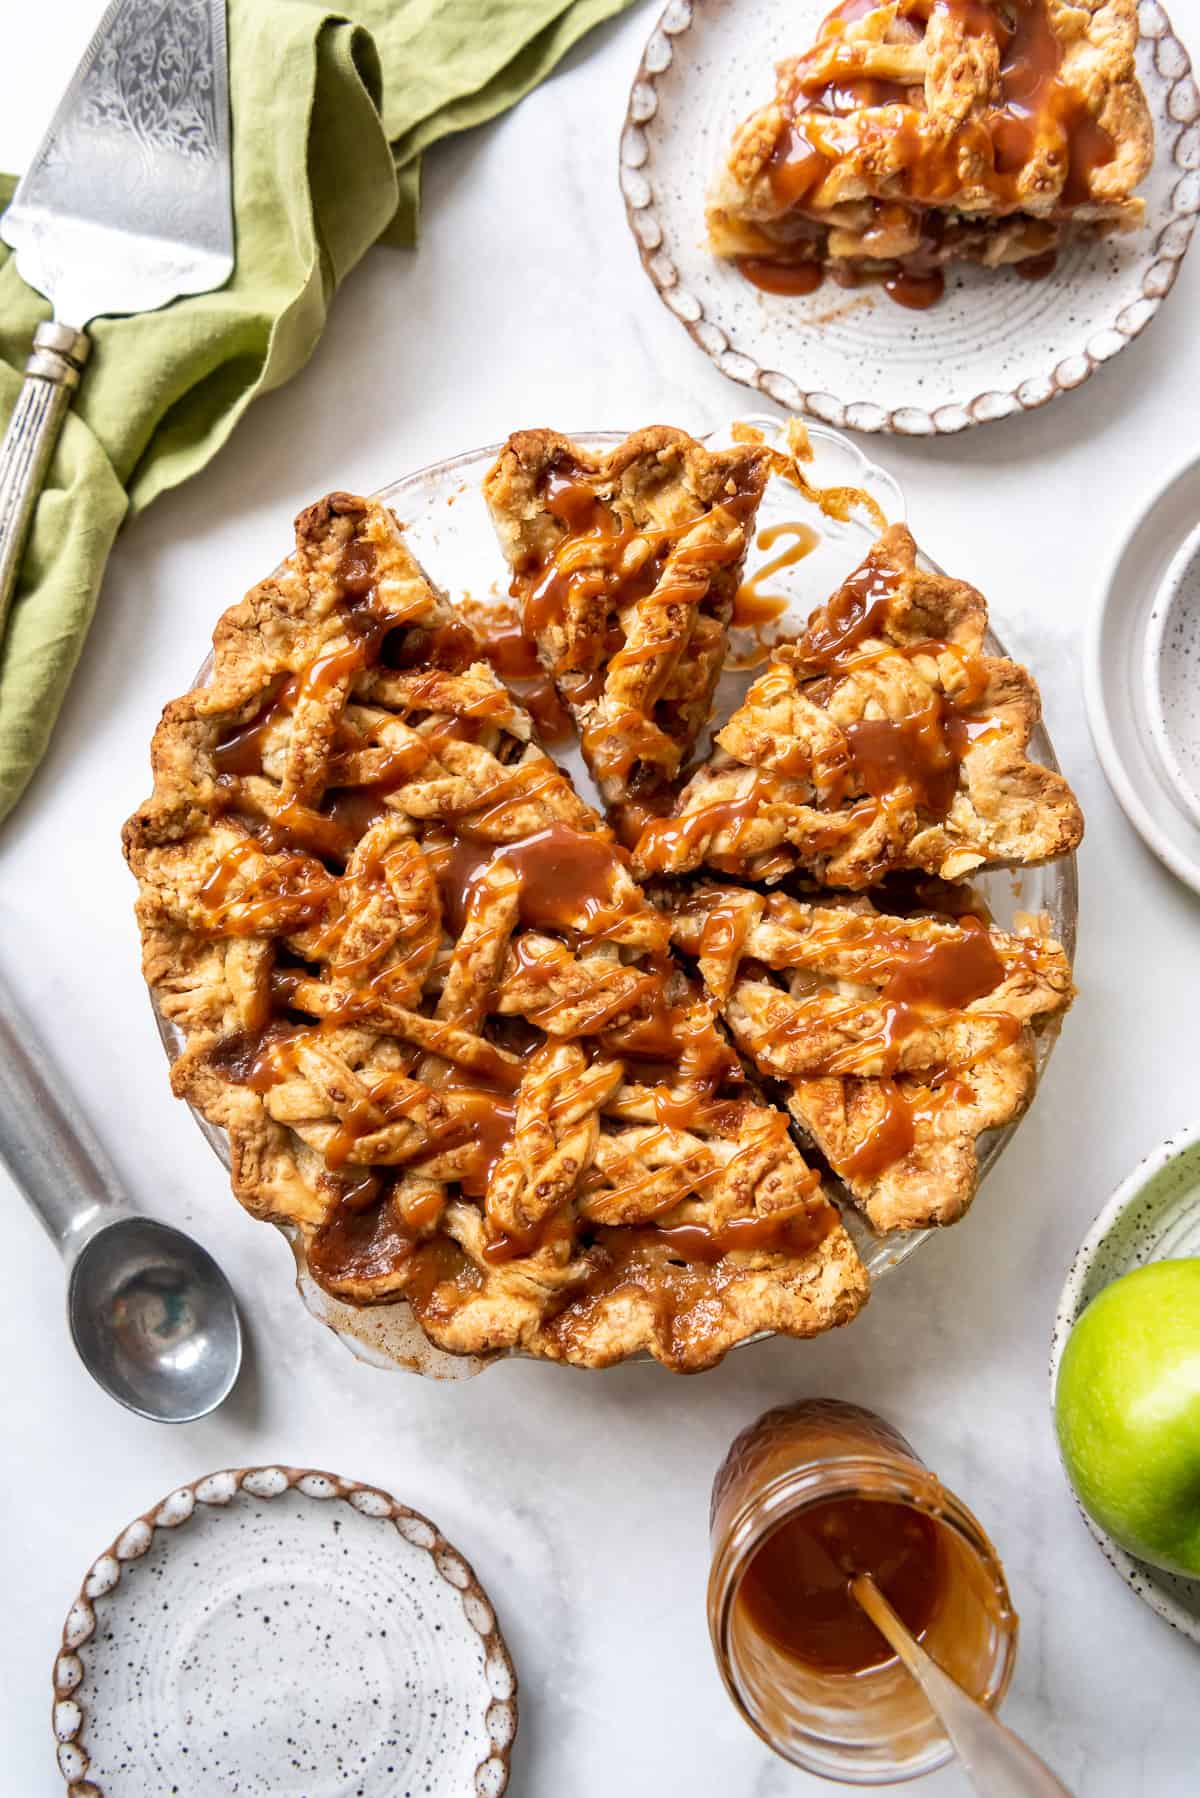 A salted caramel apple pie with some slices removed.